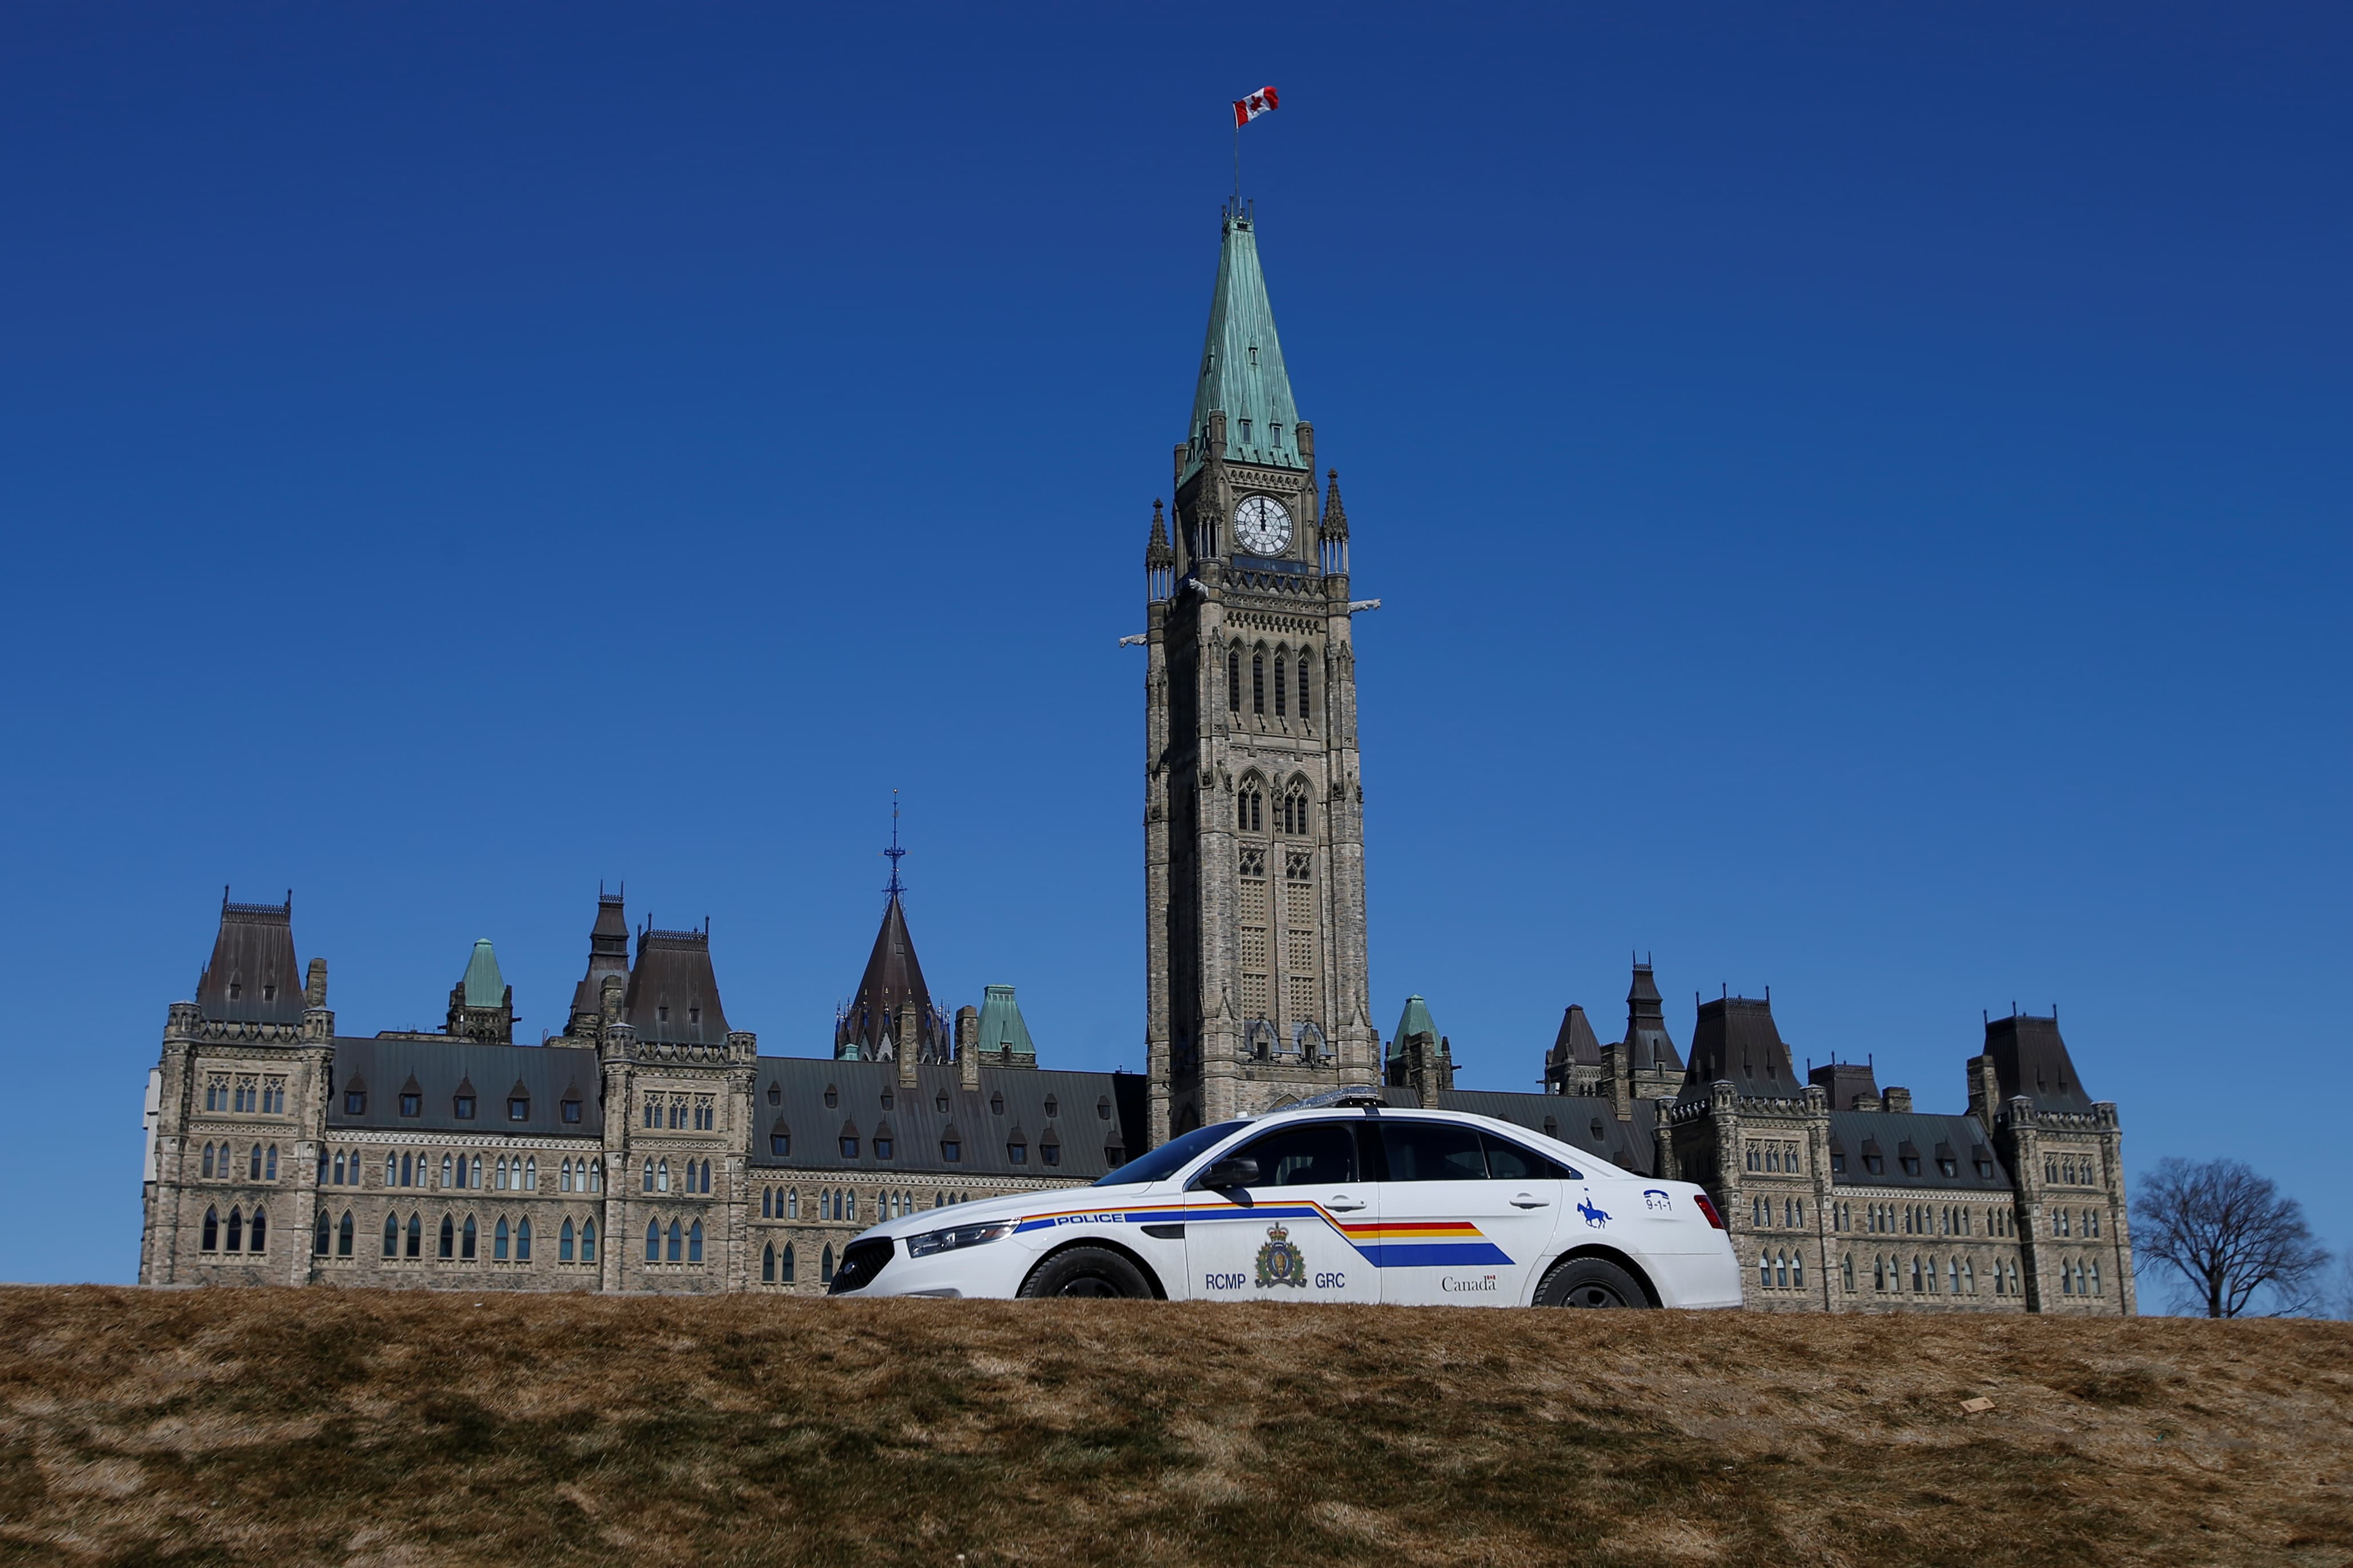 A Royal Canadian Mounted Police (RCMP) vehicle is seen on Parliament Hill in Ottawa, Ontario, Canada, 22 March 2017, REUTERS/Chris Wattie